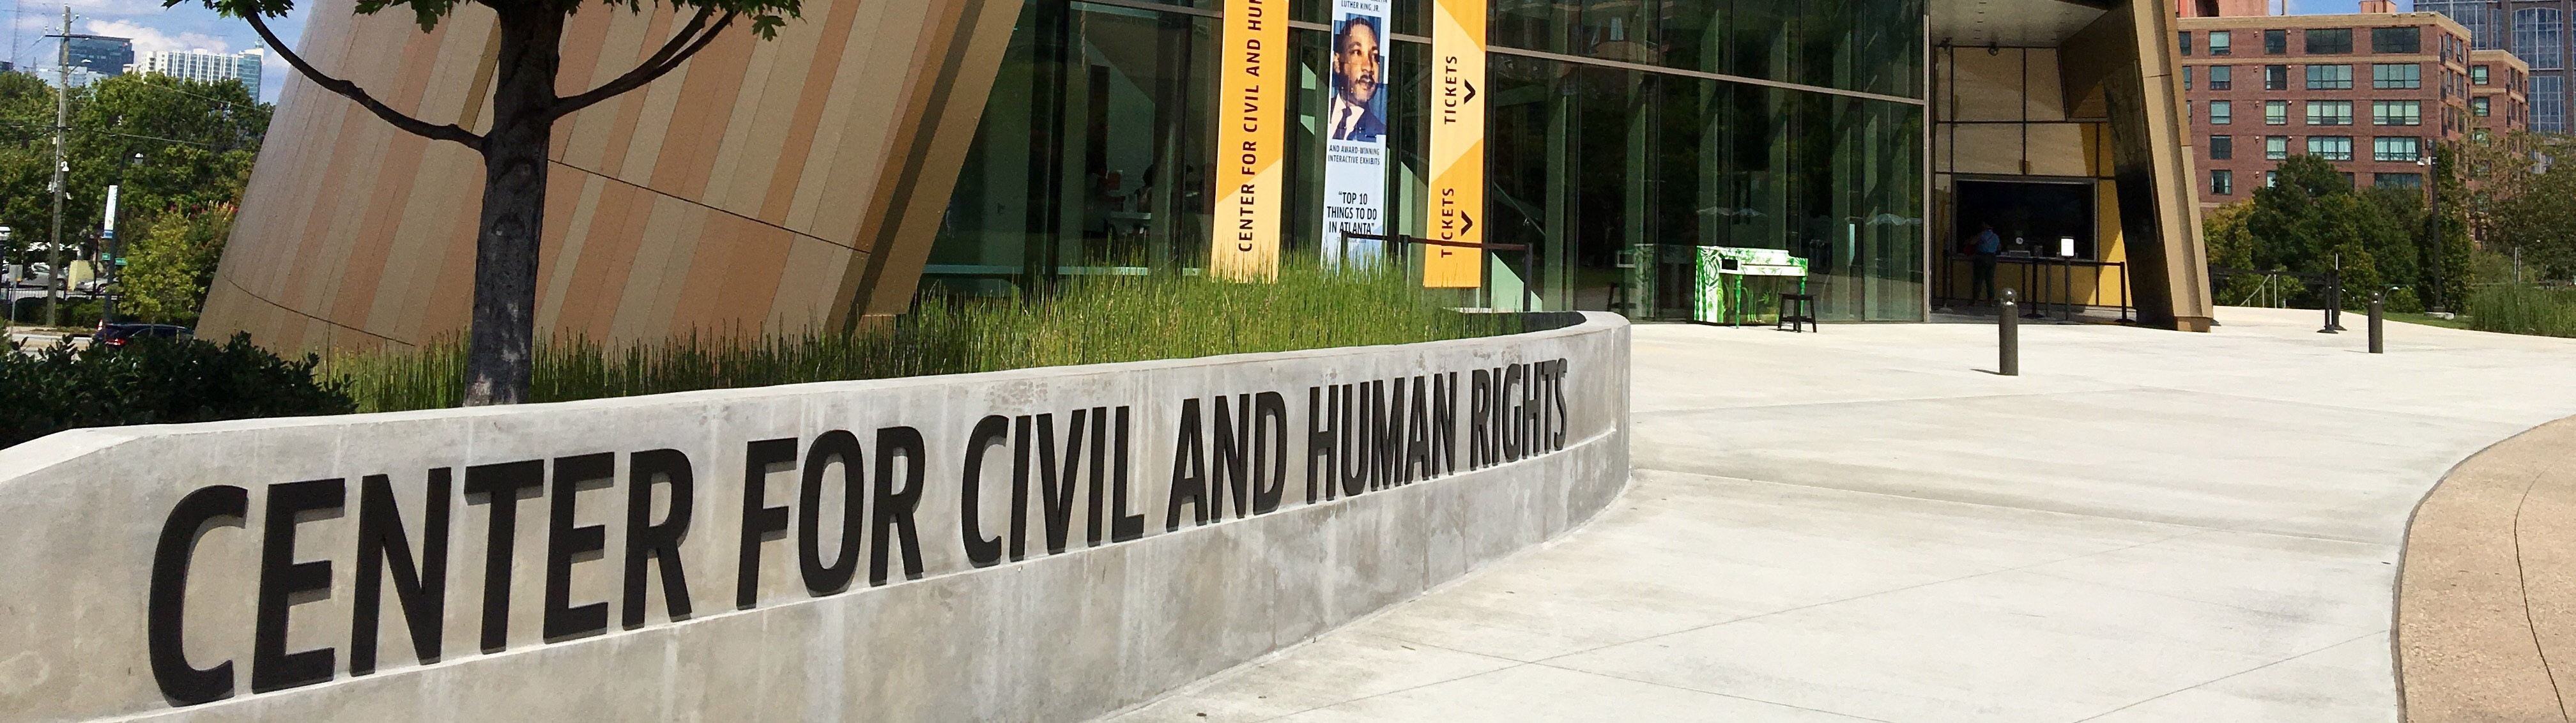 outside of center for civil and human right museum